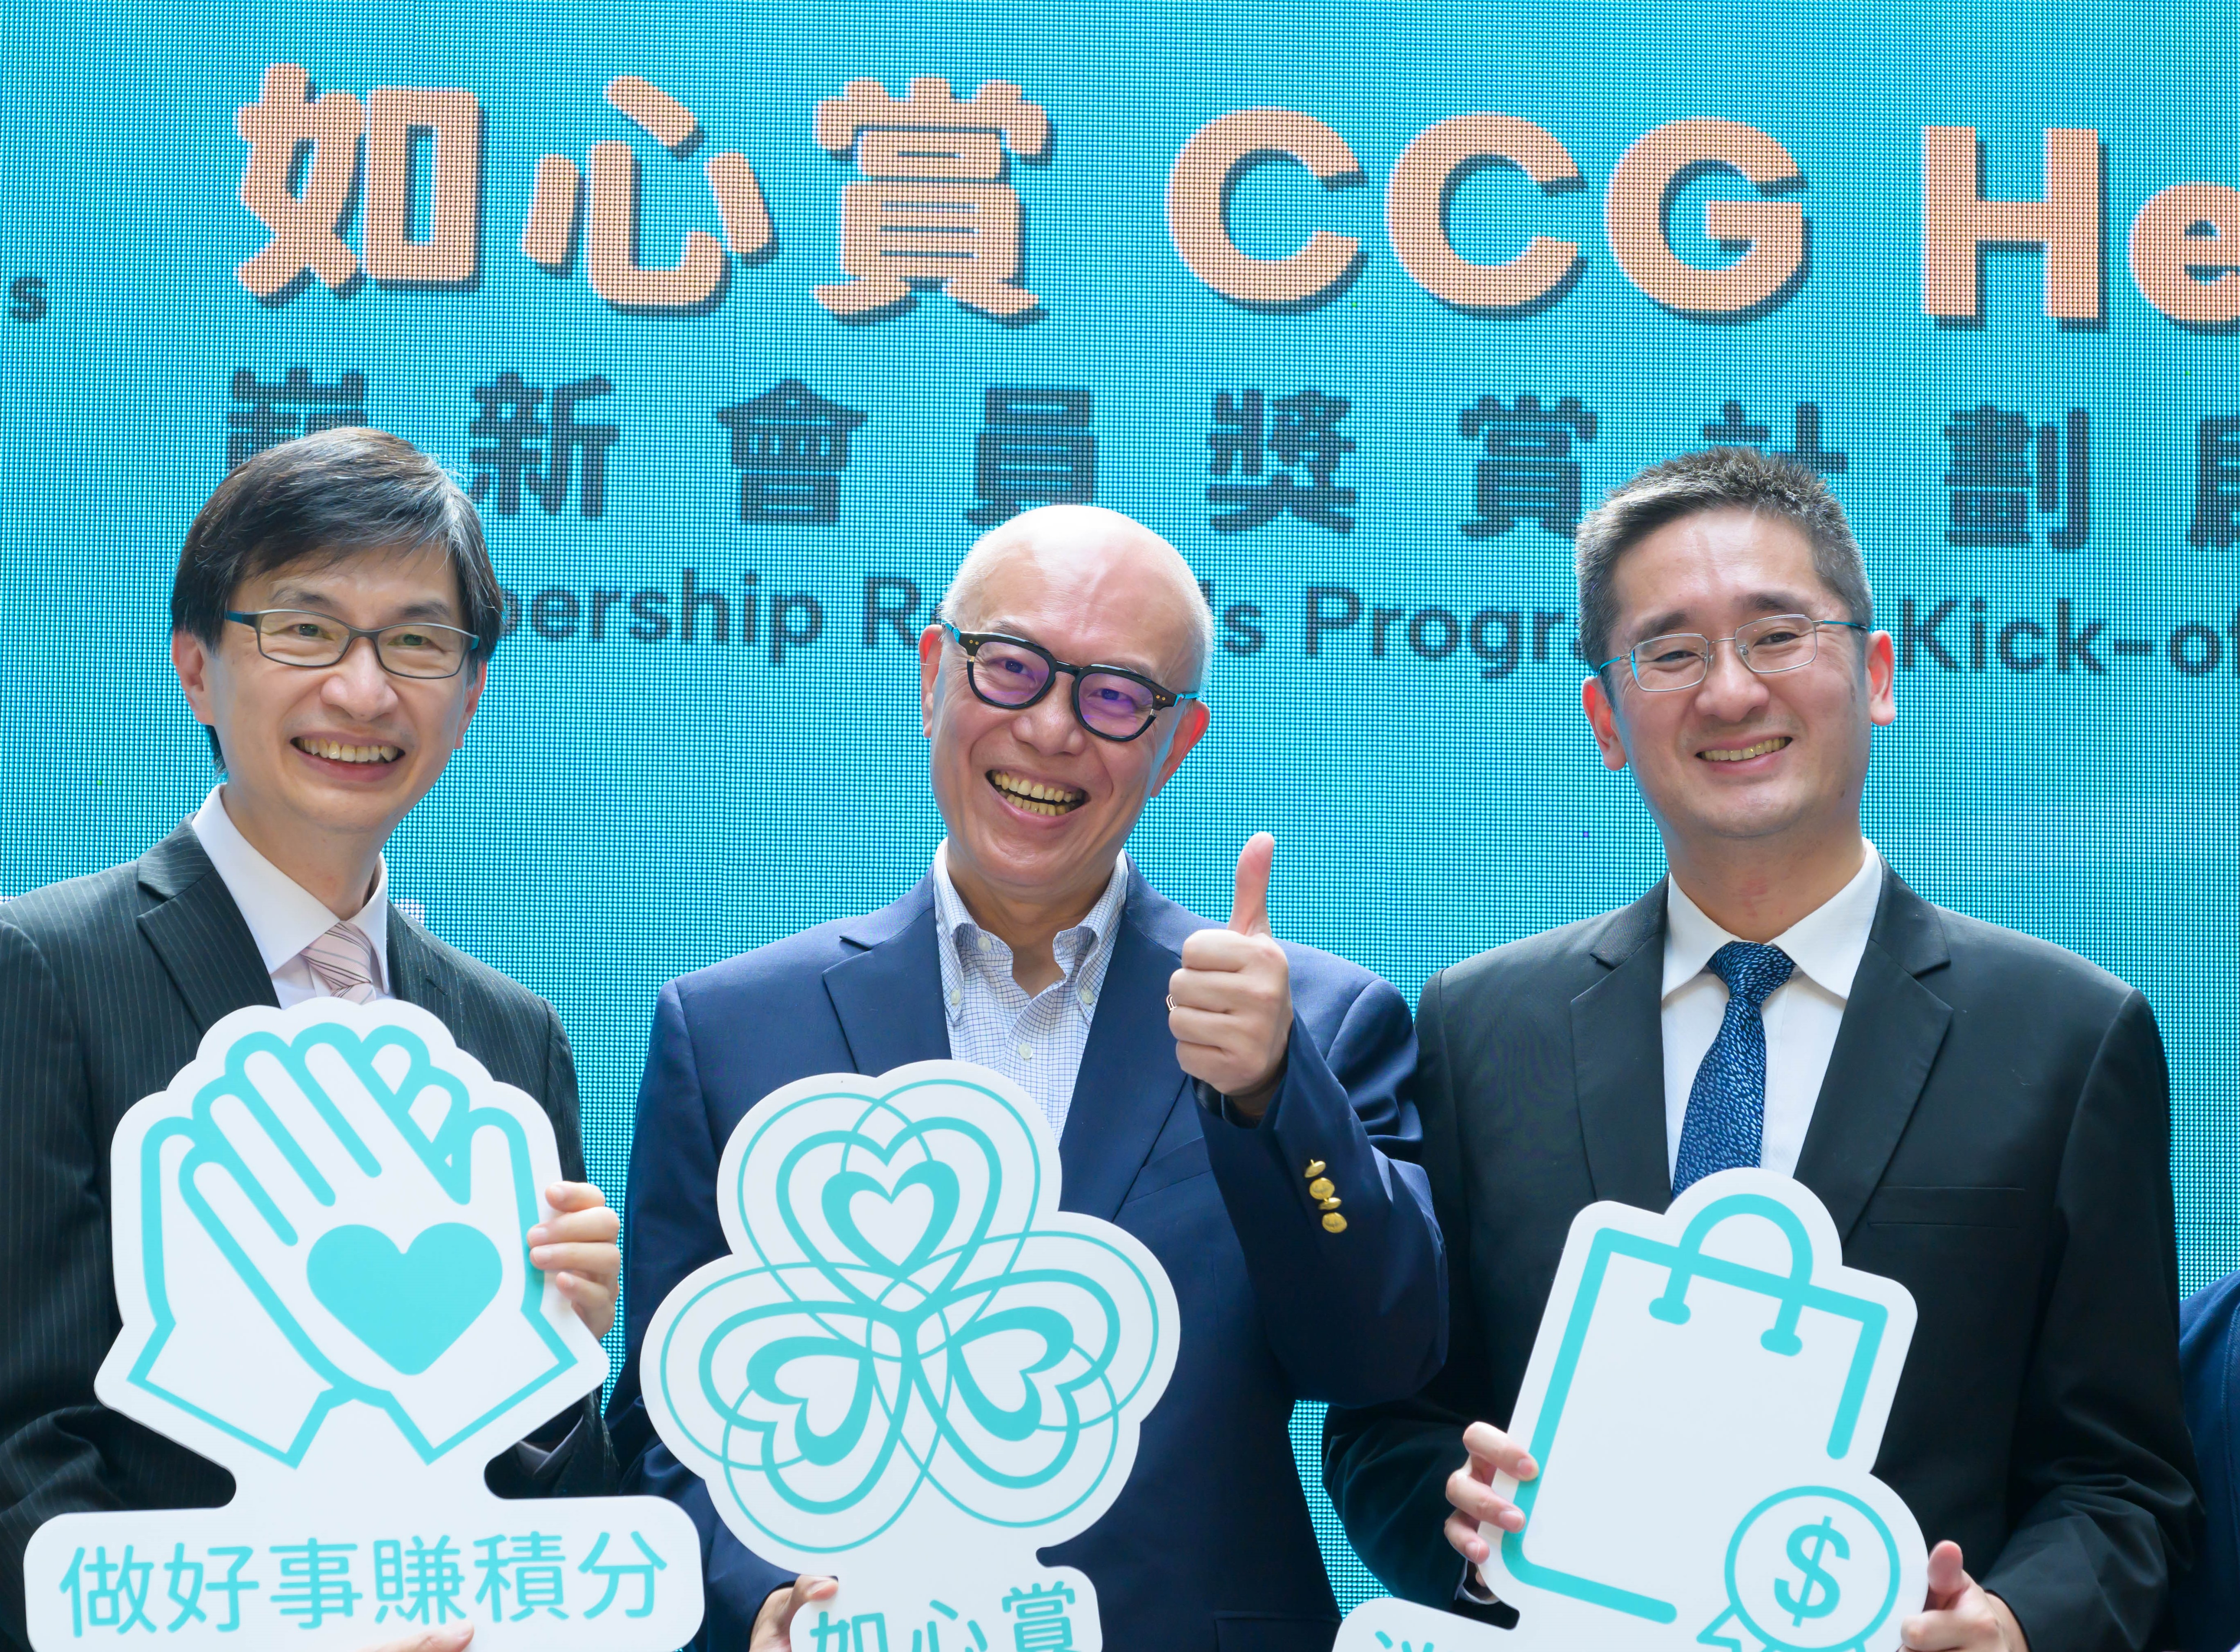 The kick-off ceremony of the CCG Hearts All New Membership Rewards Programme was hosted by Dr. Bernard Chan Pak-li, Under Secretary for Commerce & Economic Development, Commerce and Economic Development Bureau, Mr. Chua Hoi Wai, Chief Executive of The HK Council of Social Service, together with Mr. Donald Choi, Executive Director and CEO of Chinachem Group, to promote the 'CCG Hearts' programme and advocate for the practice of “Big Heart. Big Rewards” among the public.